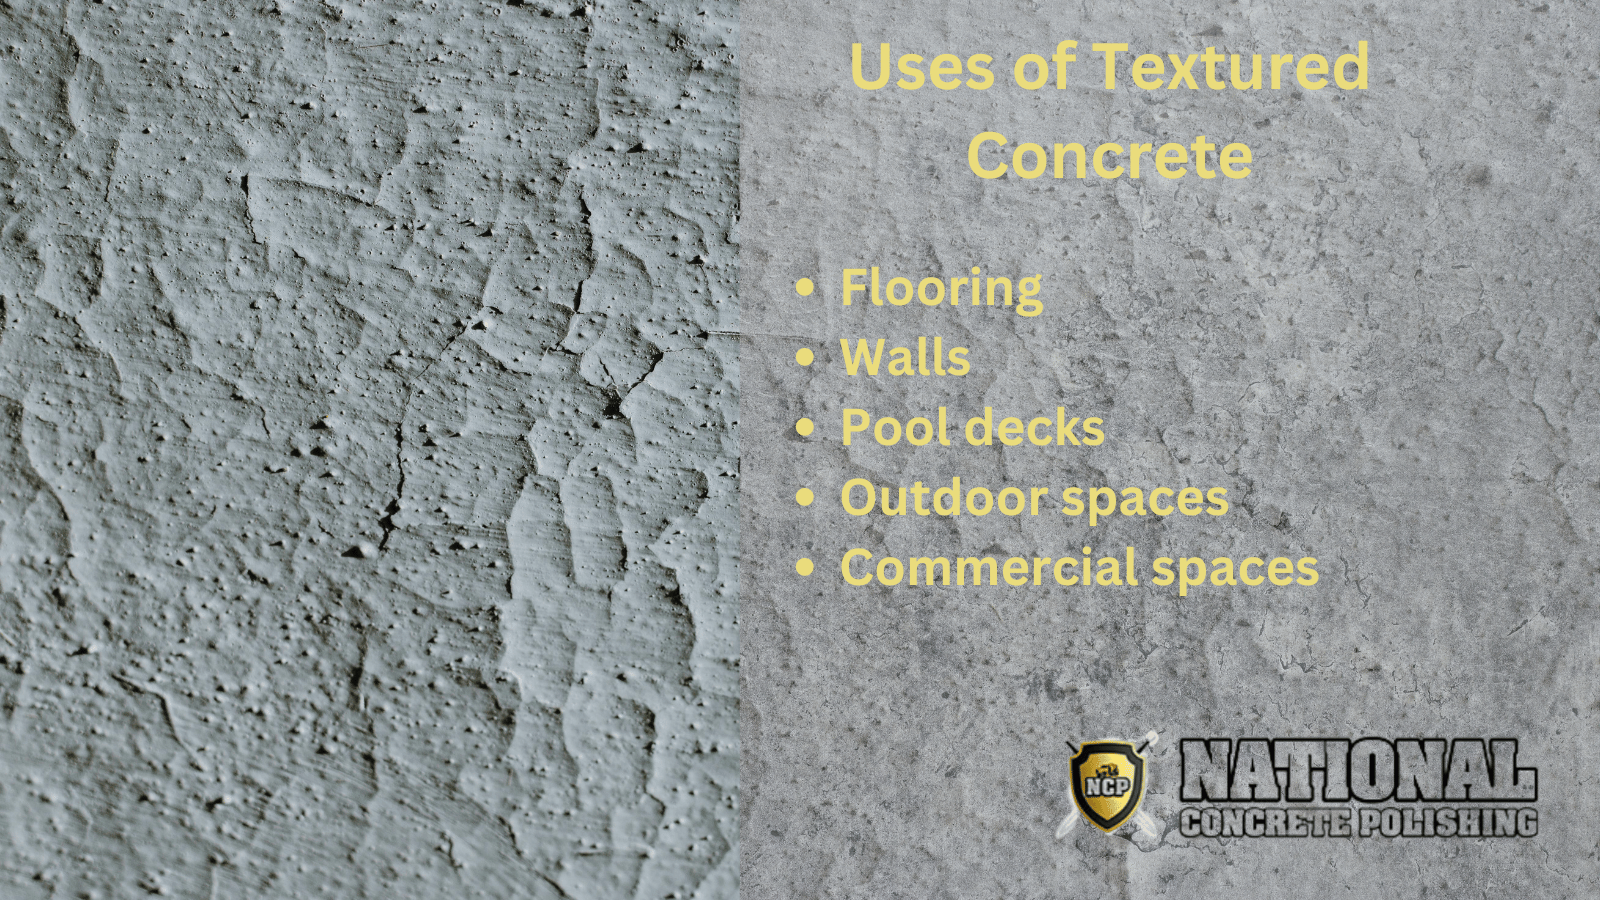 Uses of Textured Concrete